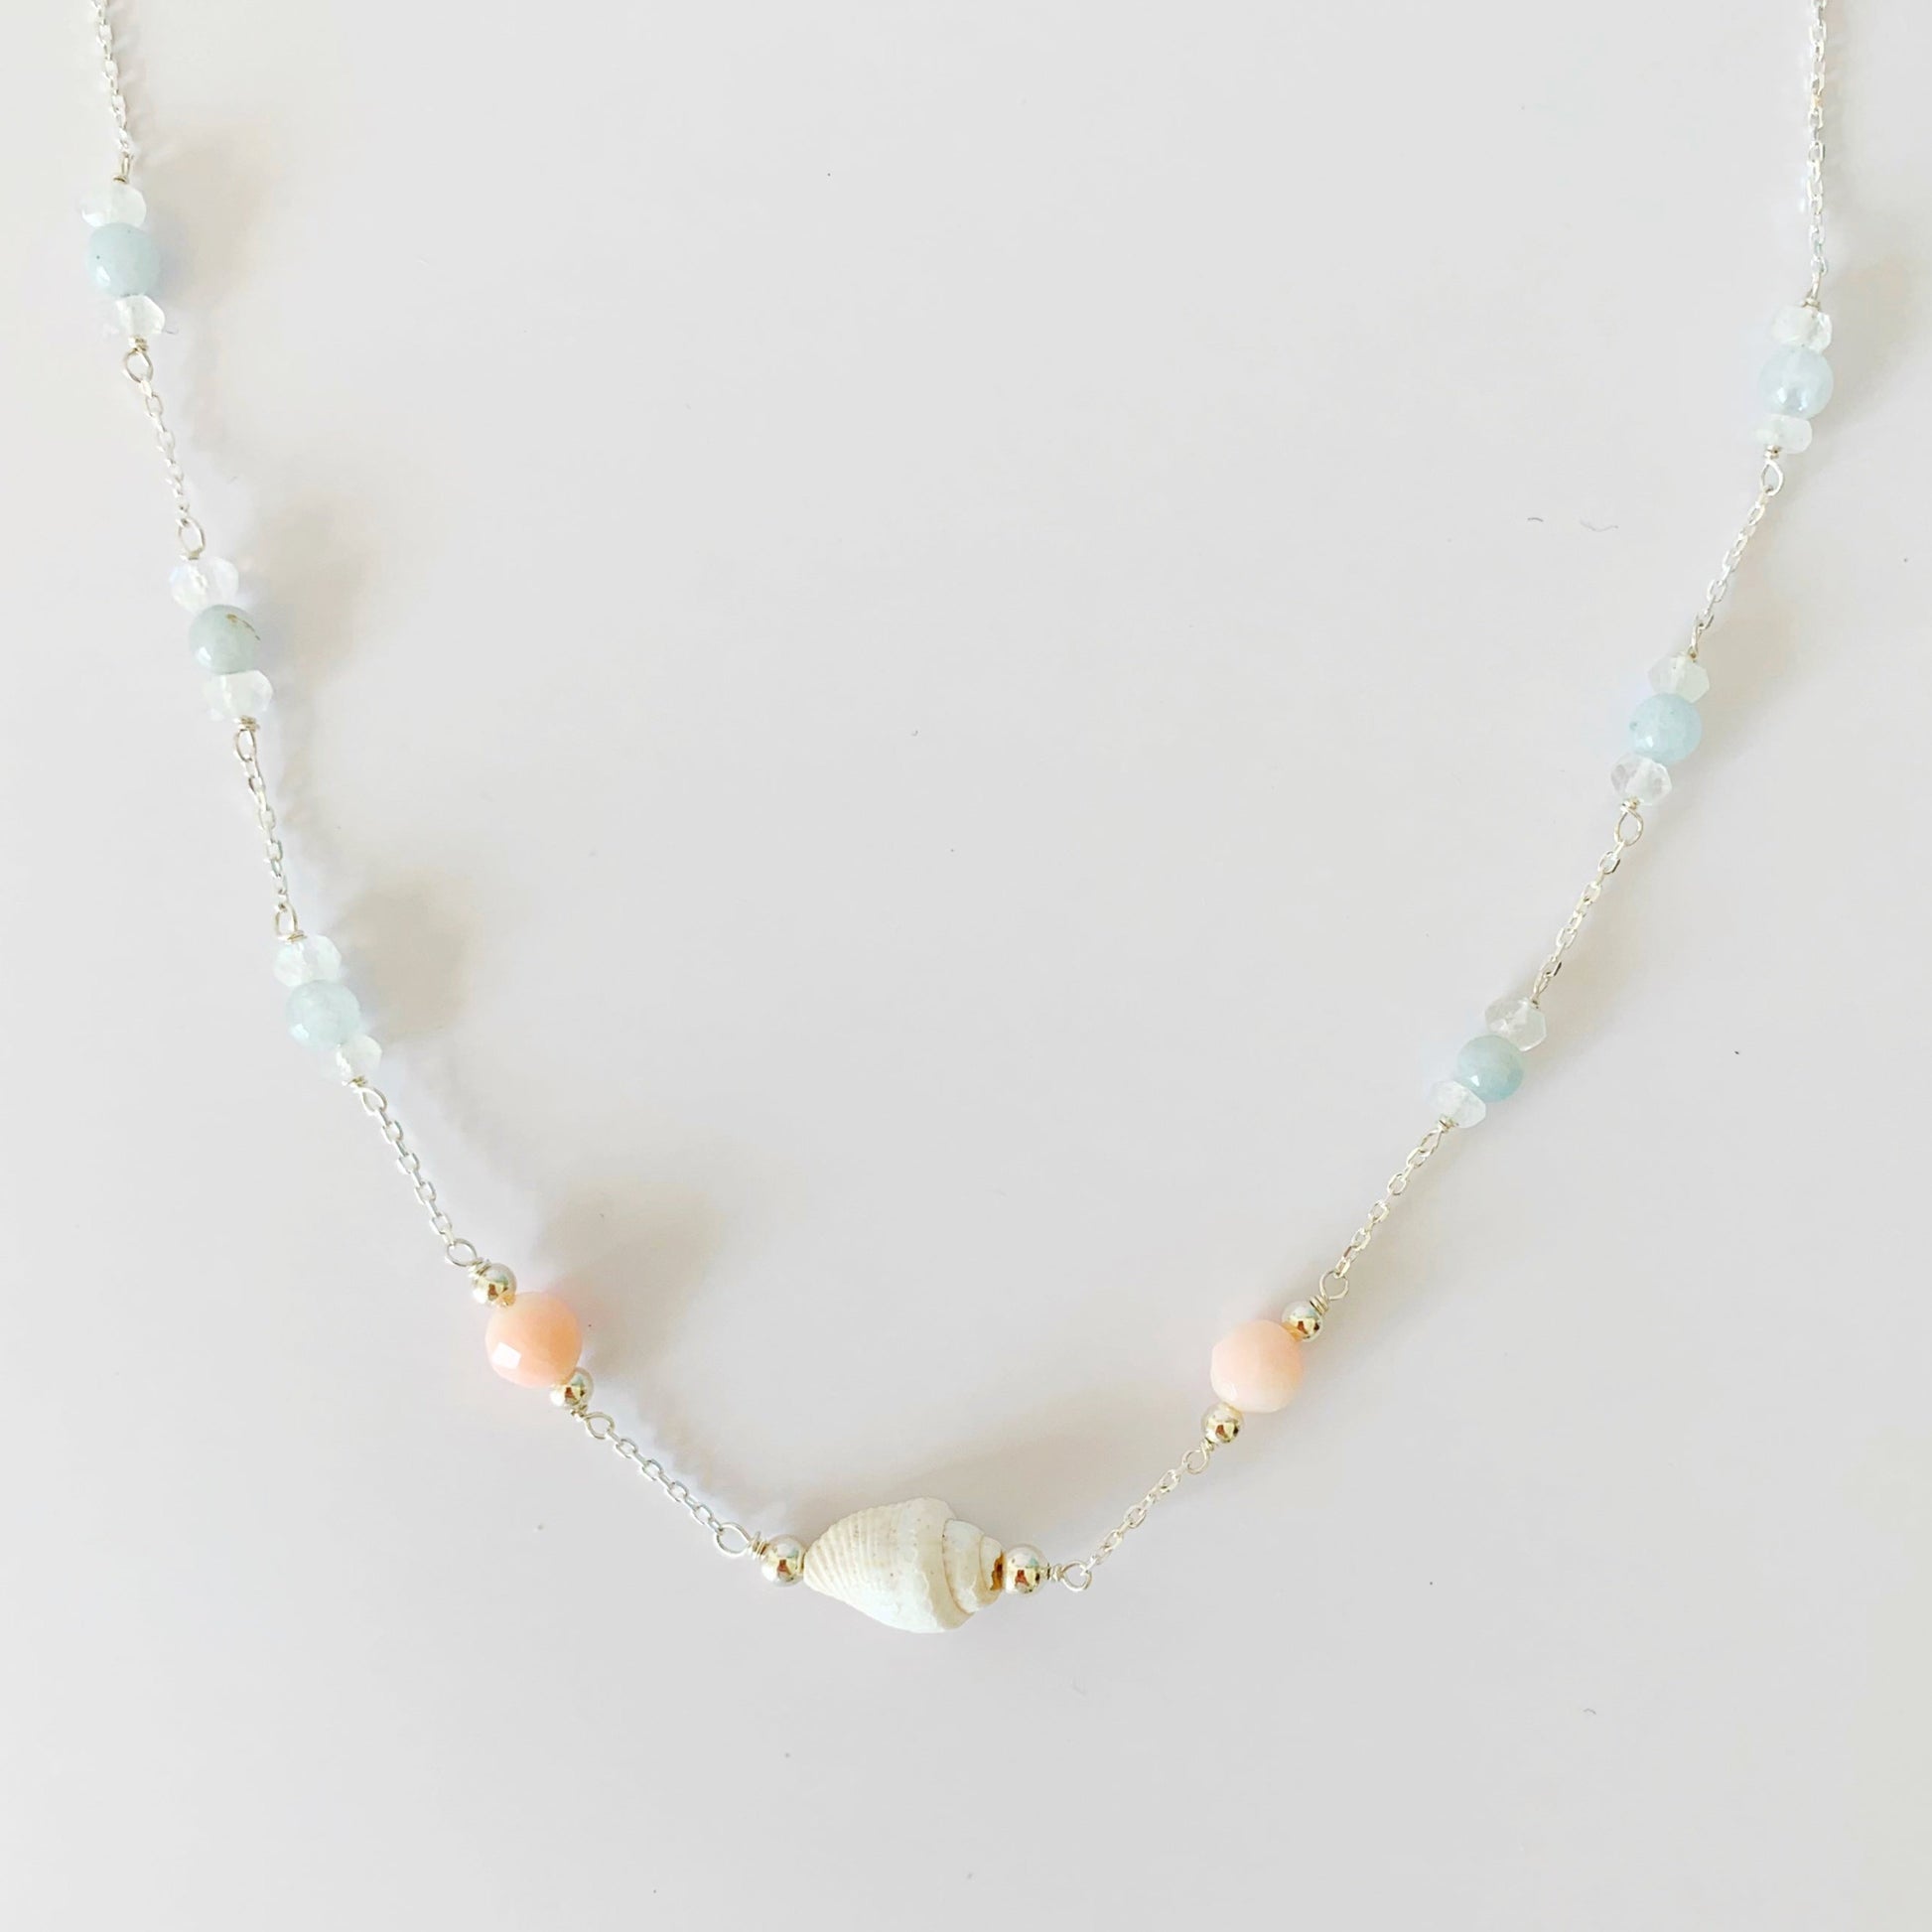 the seersucker necklace by mermaids and madeleines is a station style necklace with a shell and coral beads at the center with segments of moonstone and aquamarine along the sterling chain to the clasp. this necklace is photographed on a white surface